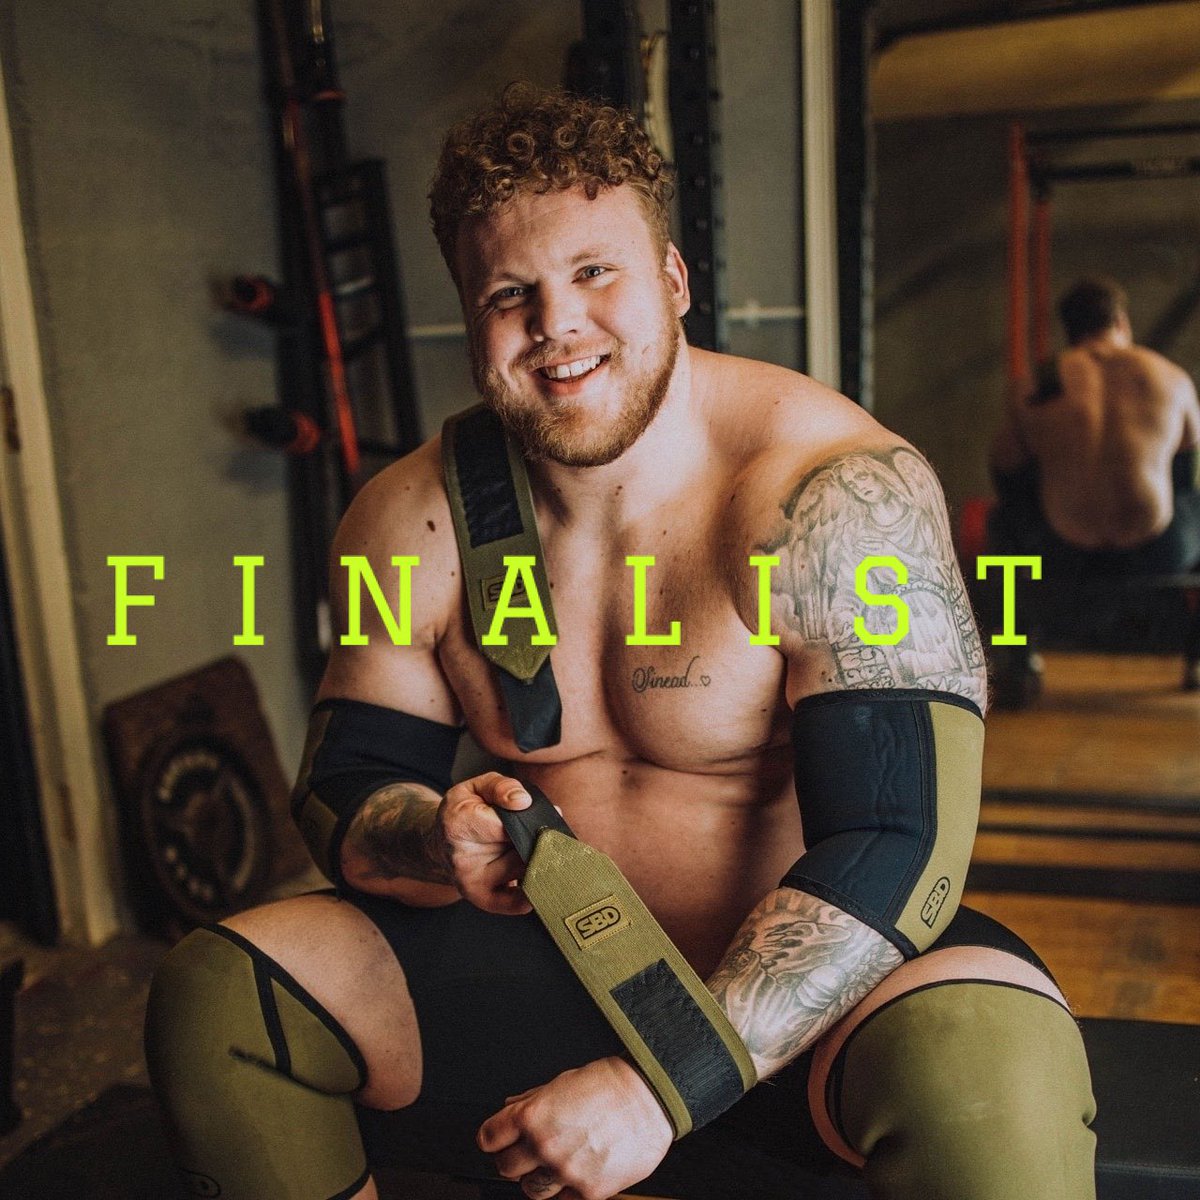 💪🏋️ BURLIEST BIGGER BLOKE 2024 🏋️💪 Big Tom 🏴󠁧󠁢󠁳󠁣󠁴󠁿 has done it! No strange to a final, we’ll find out who he’ll be up against very soon. Thank you for voting! 😊